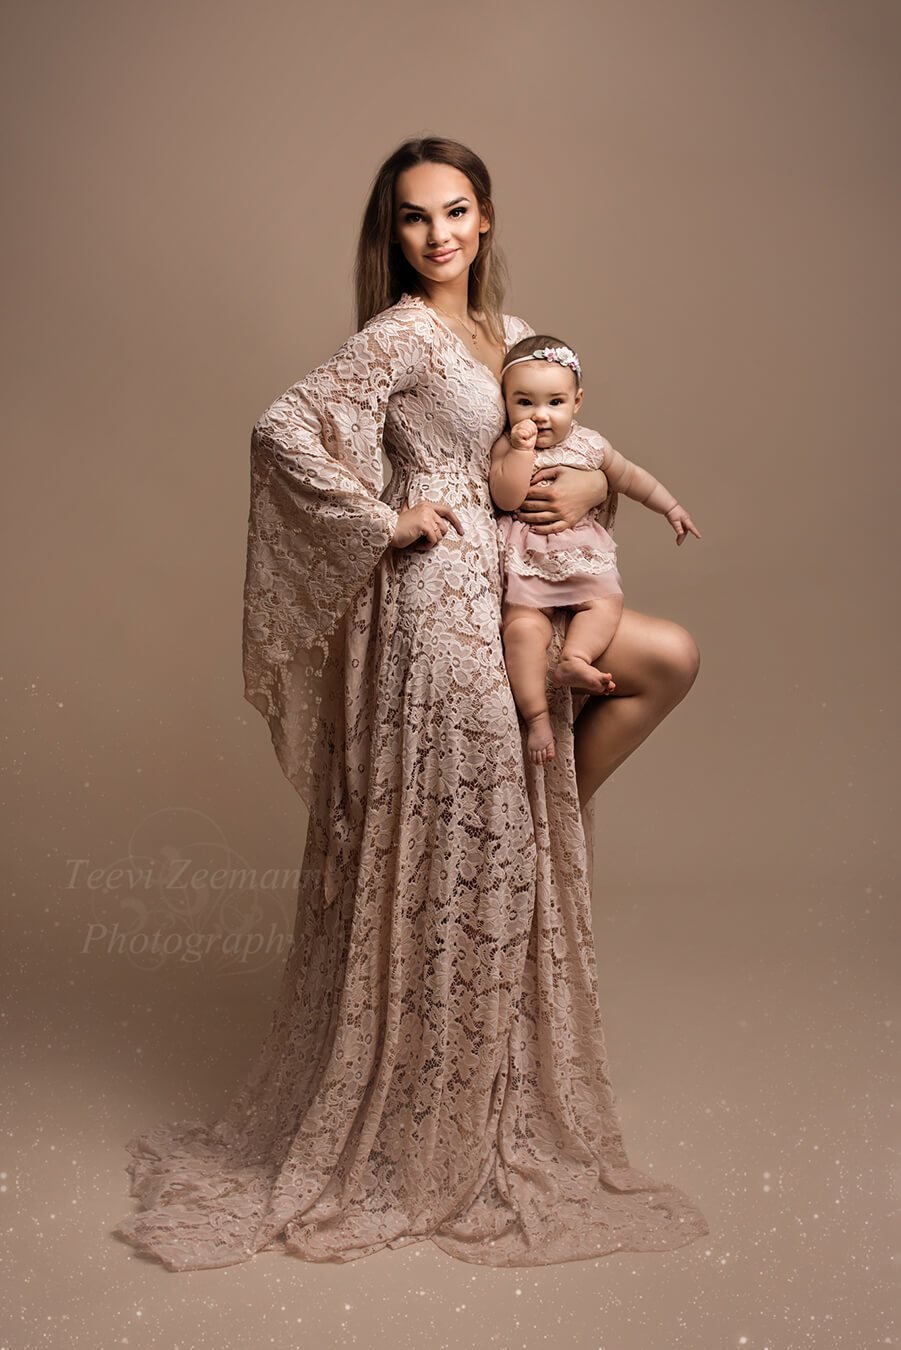 Photo session between mother and daughter. The mother has long brown hair and has her child sitting in one of her legs. They are both staring at the camera and wearing matching outfits in dusty pink. The mother wears a long dress with long kaftan sleeves made of lace and the baby a lace romper with a matching chiffon skirt - and a little head band with flowers. 